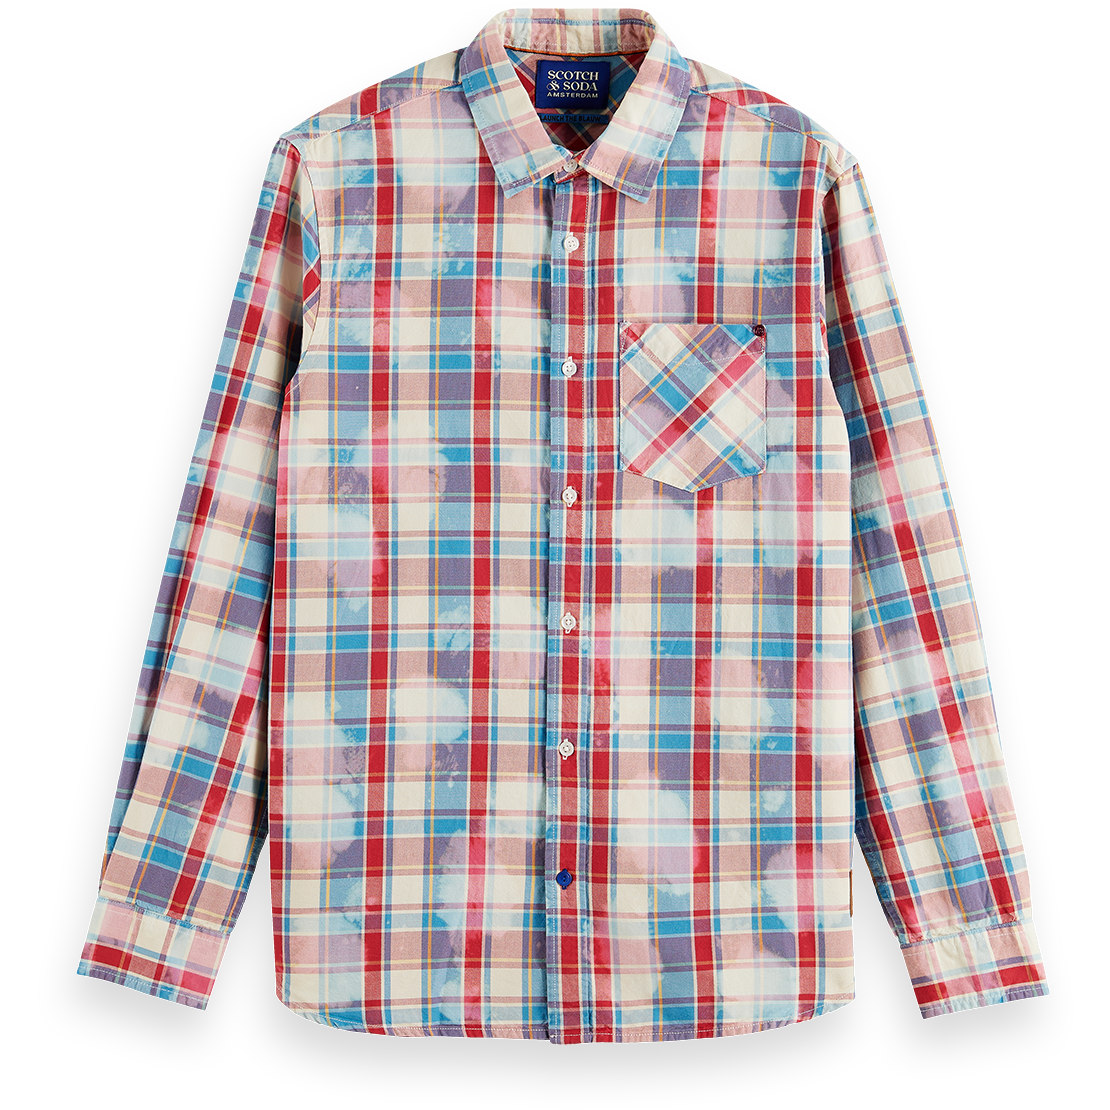 Scotch & Soda - Denim Washed Checked Workwear Shirt in Red Check-SQ0052014